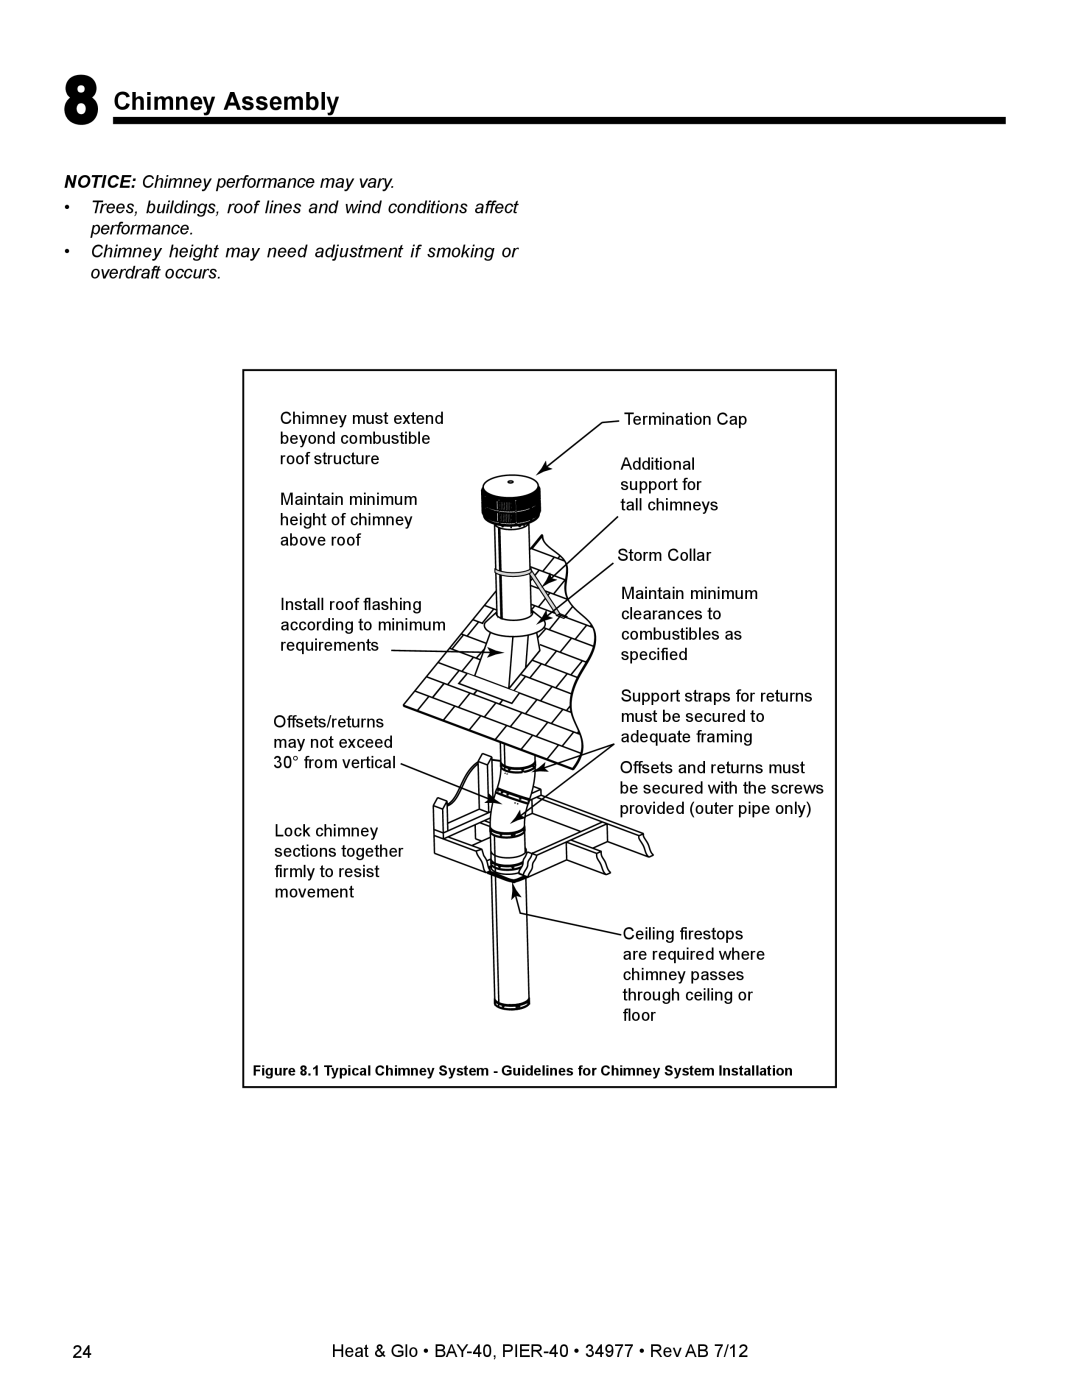 Heat & Glo LifeStyle PIER-40 owner manual 8Chimney Assembly 